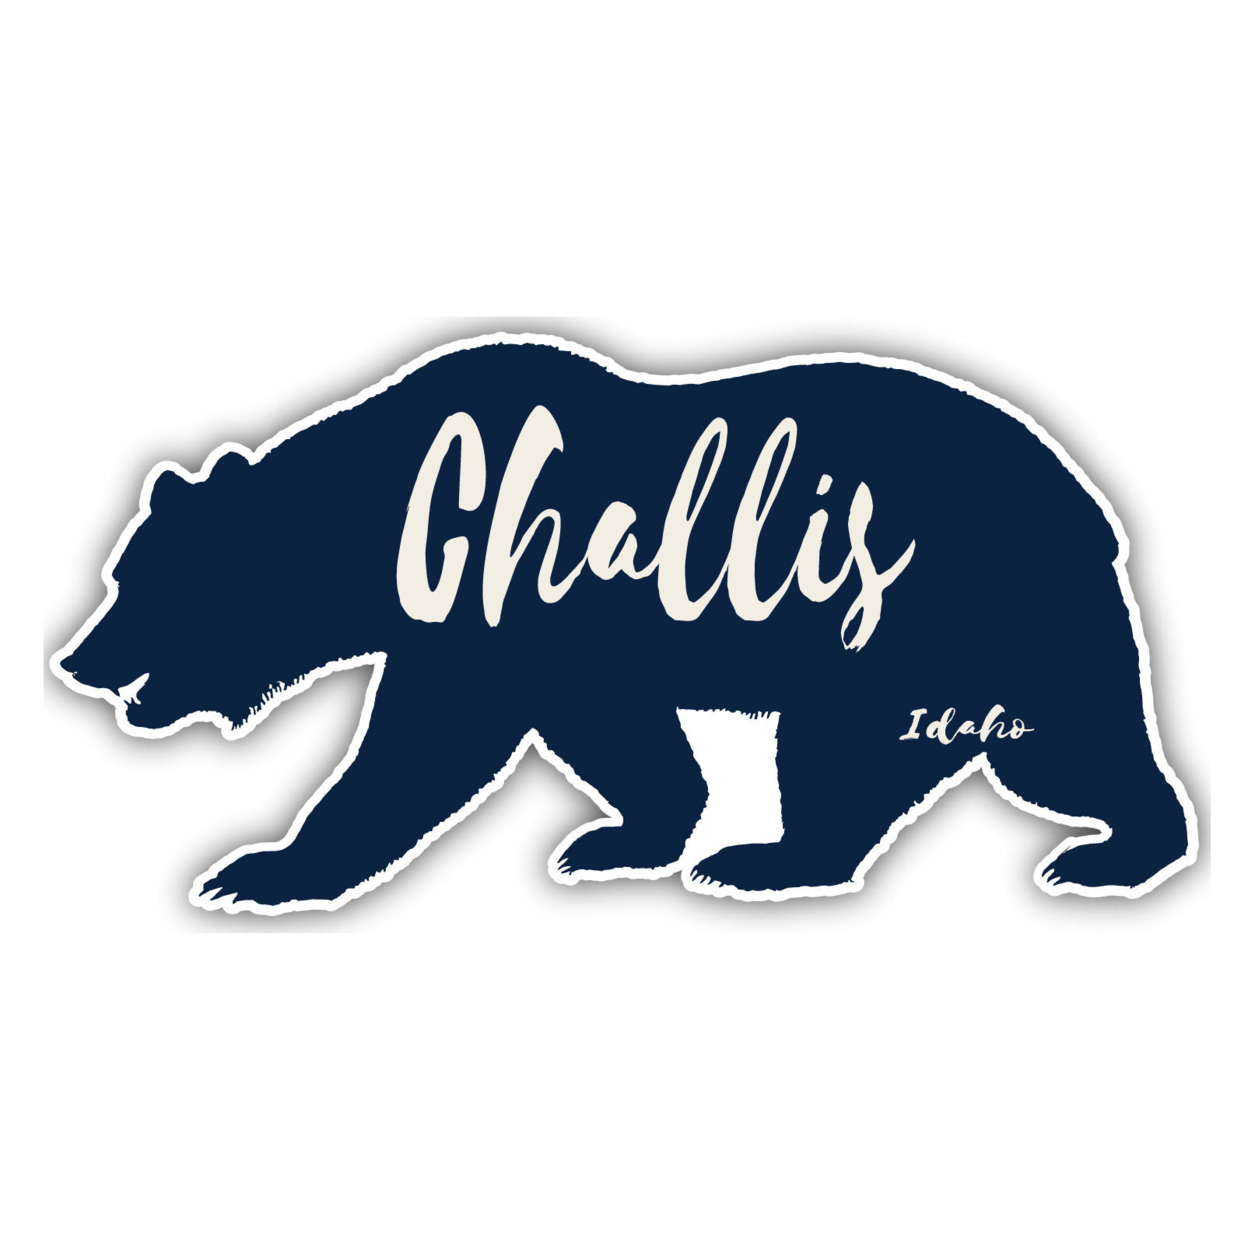 Challis Idaho Souvenir Decorative Stickers (Choose Theme And Size) - 4-Pack, 2-Inch, Tent